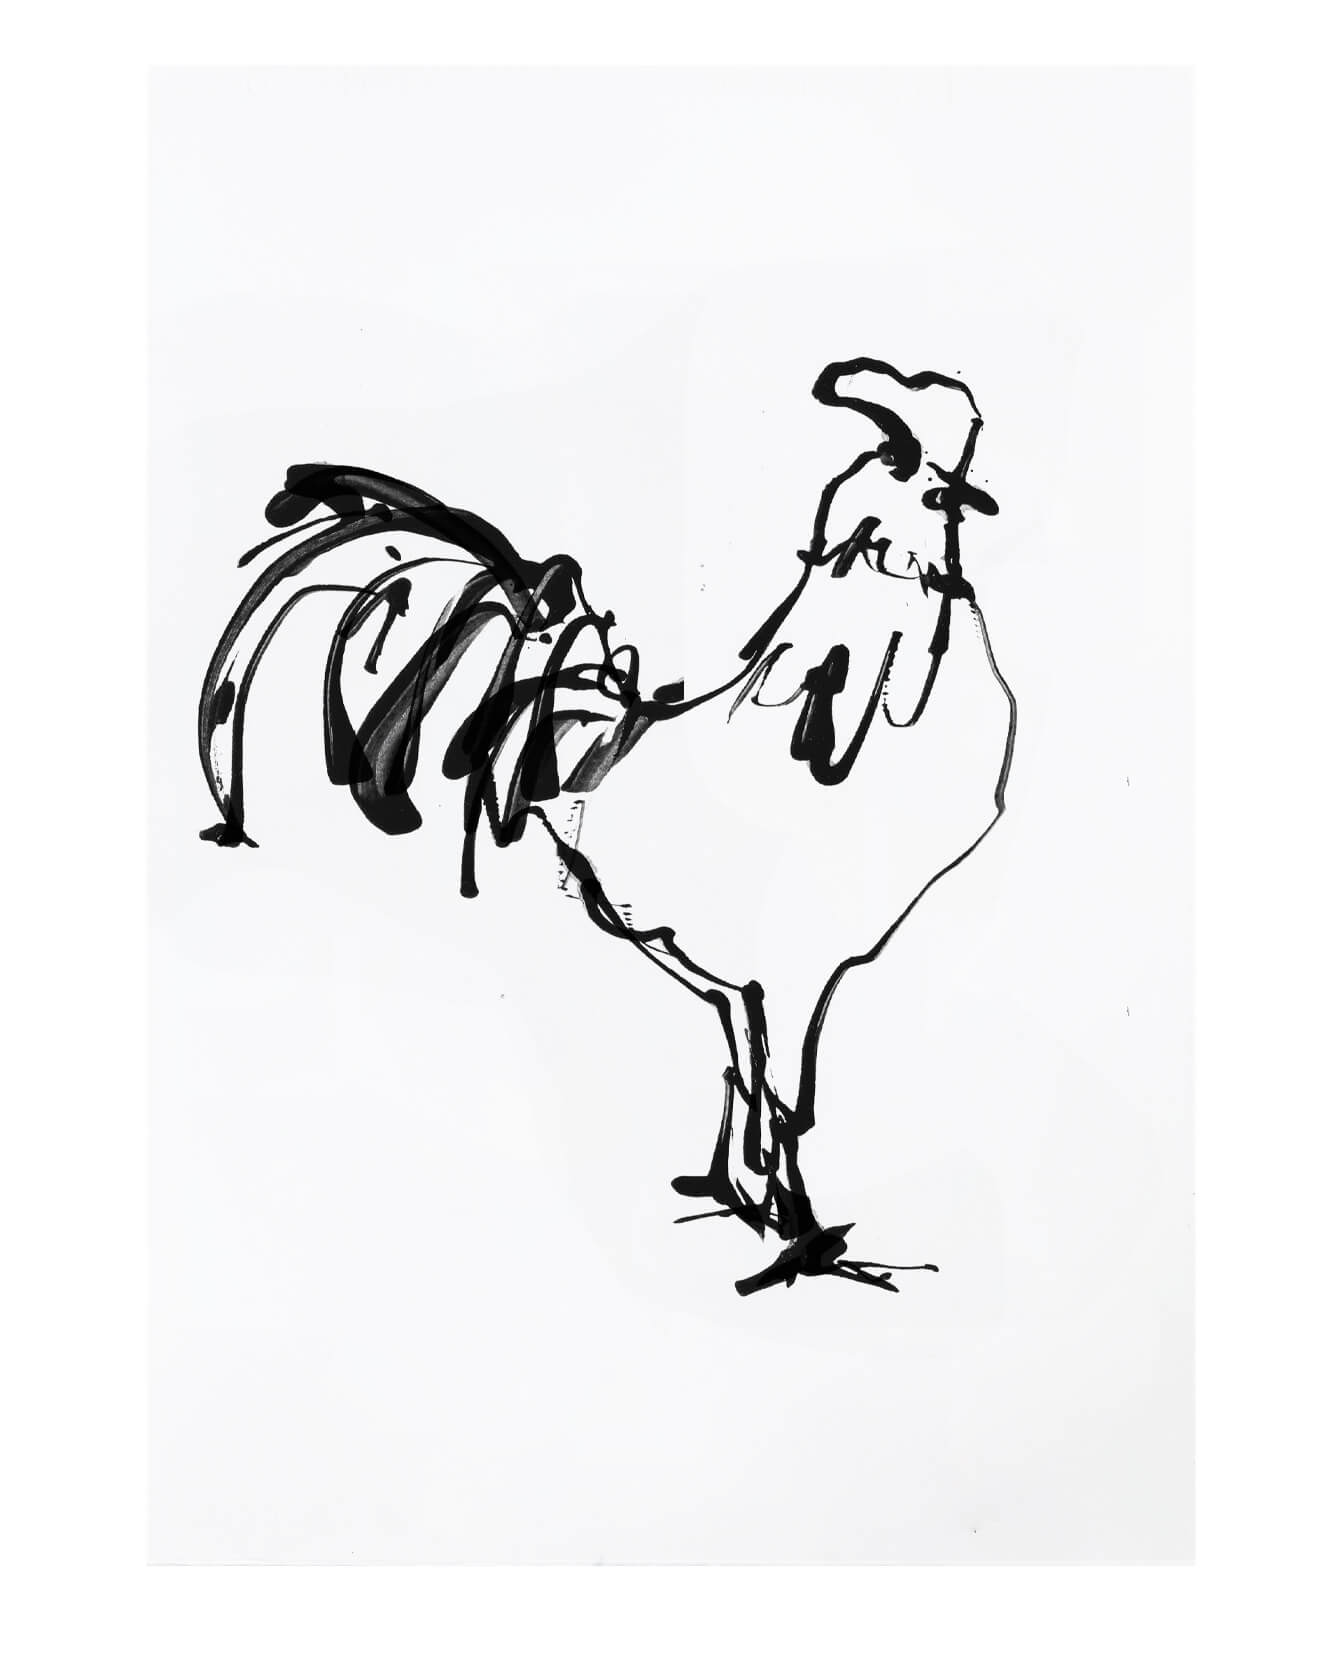 An artists sketchbook of line drawings inspired by a month in Cotswolds countryside. Simple line drawings for these illustrations of chickens. Animals, architecture and landscape drawings.